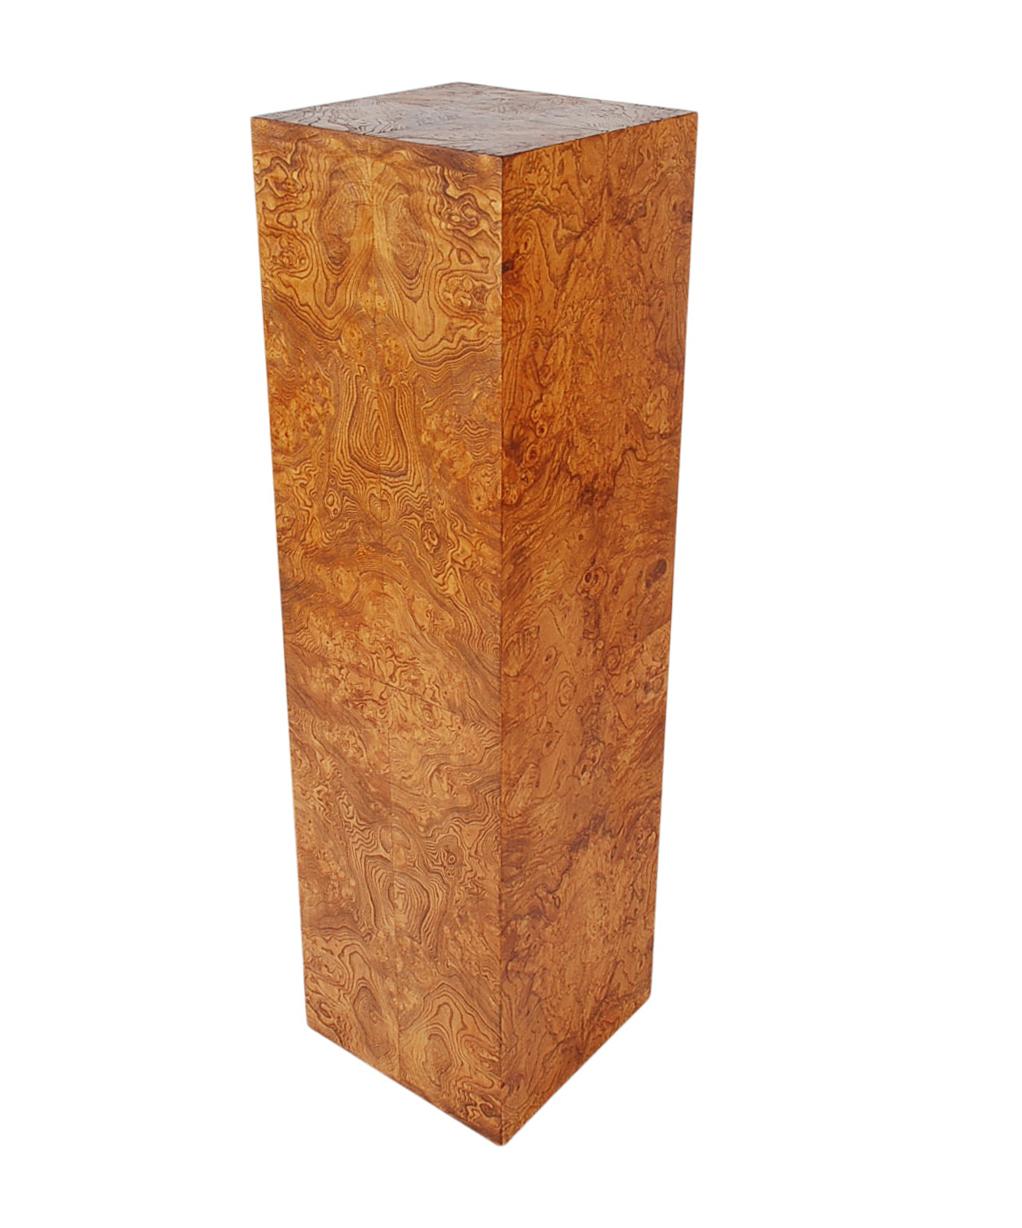 A gorgeous classic pedestal designed by Milo Baughman and produced by Thayer Coggin in the 1960s. It features solid wood construction with beautiful book matched olive burl. Clean and ready to use condition.